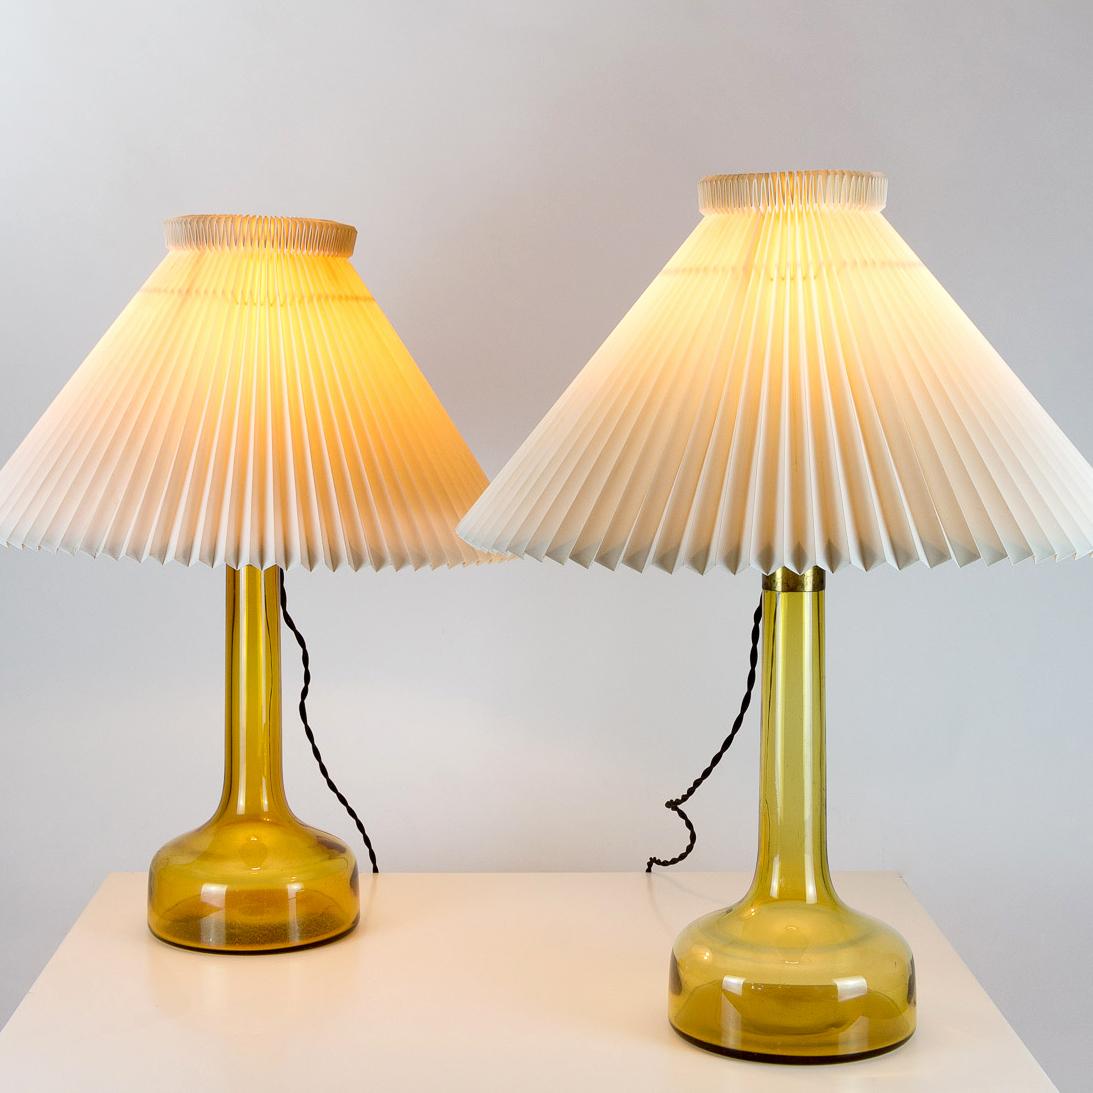 A near pair of midcentury yellow glass table lamps by Holmegaard for Le Klint with original Le Klint Shades. Measures: Base diameter is 19cm, shade diameter is 50cm, approximately 10cm difference in height due to different brass bulb holders. Some